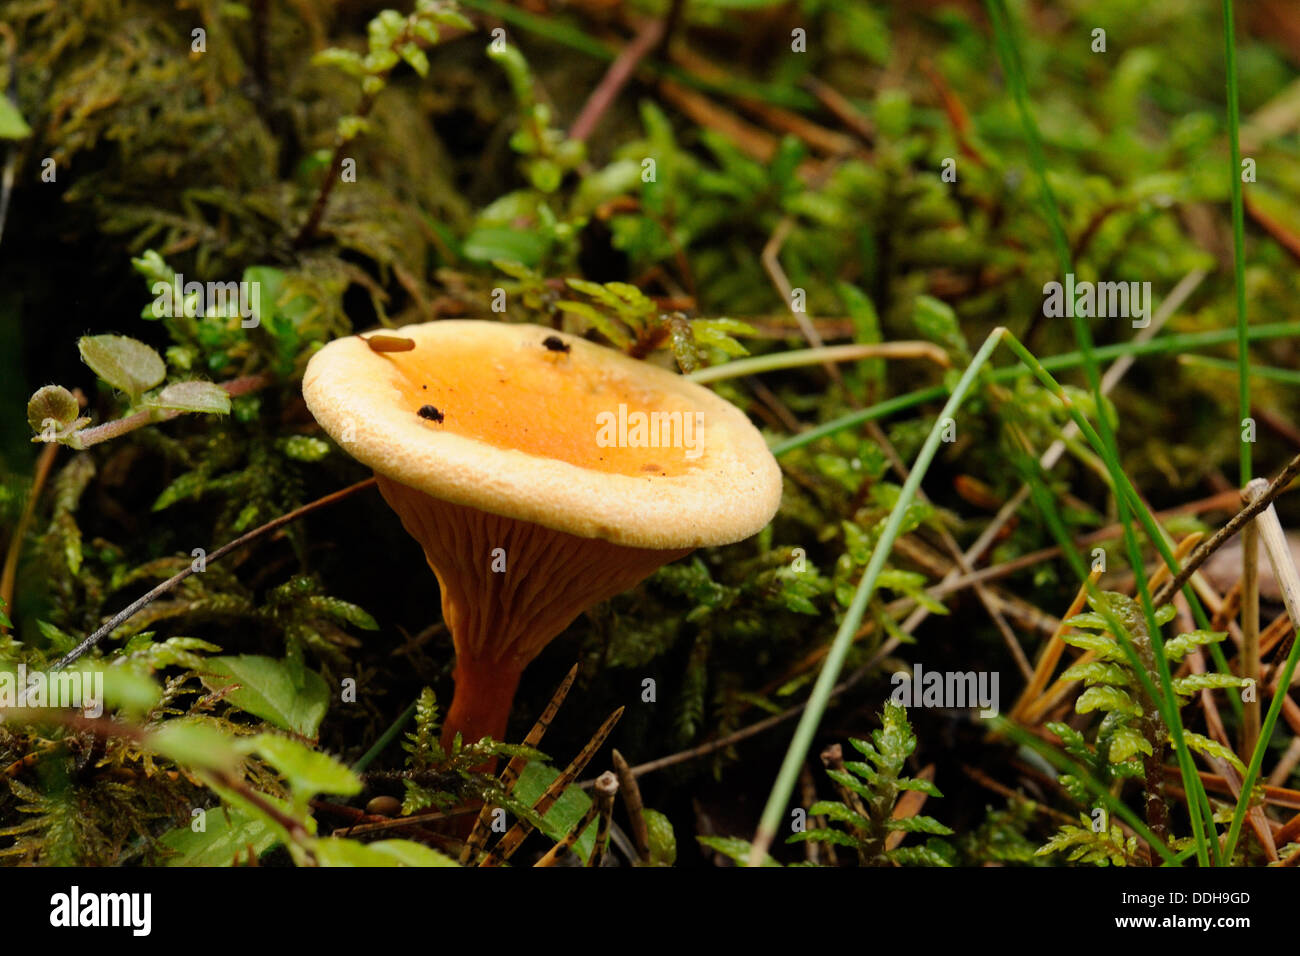 Cantharellus cibarius, commonly known as the chanterelle, golden chanterelle or girolle, is a fungus. Stock Photo